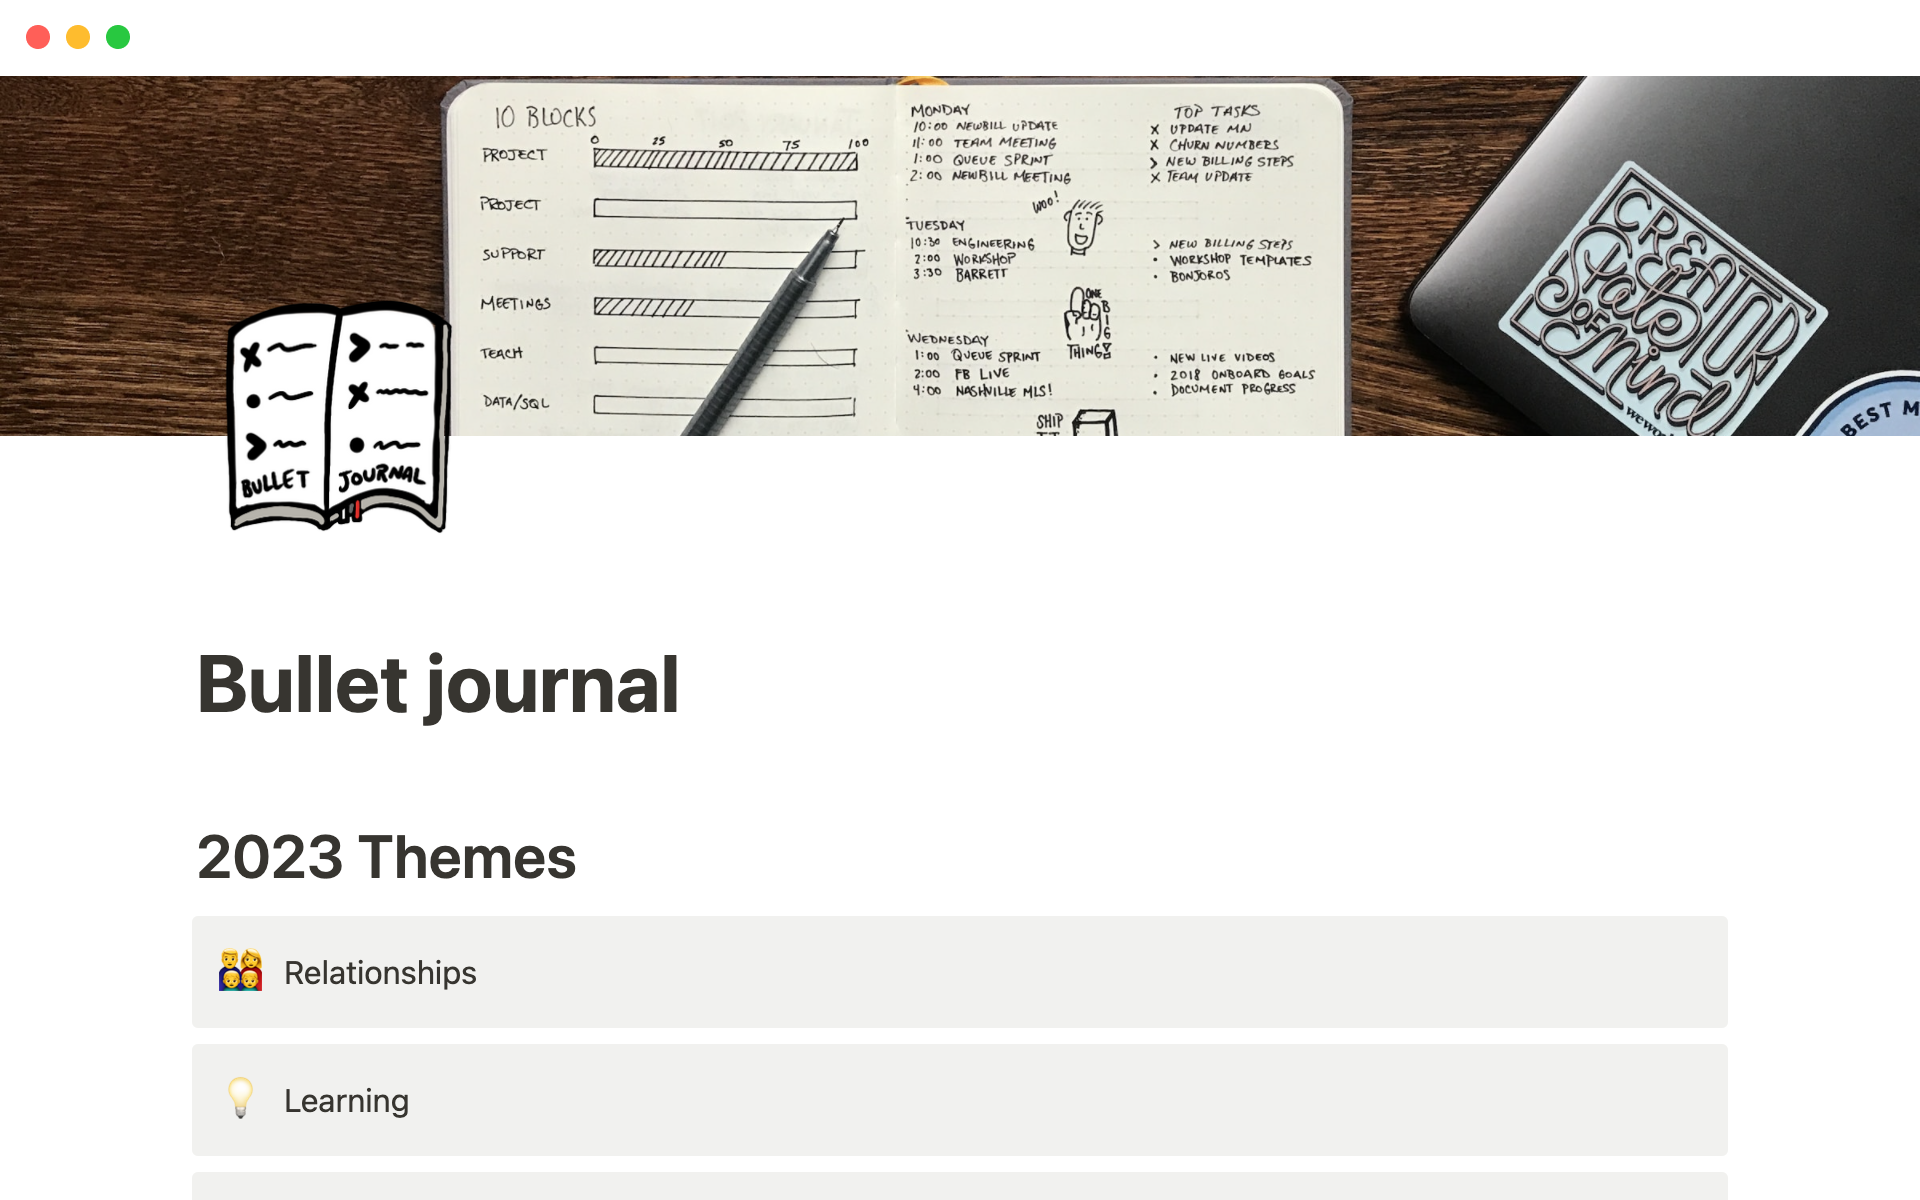 A digital bullet journal for tracking tasks, collections, dates — whatever you want.